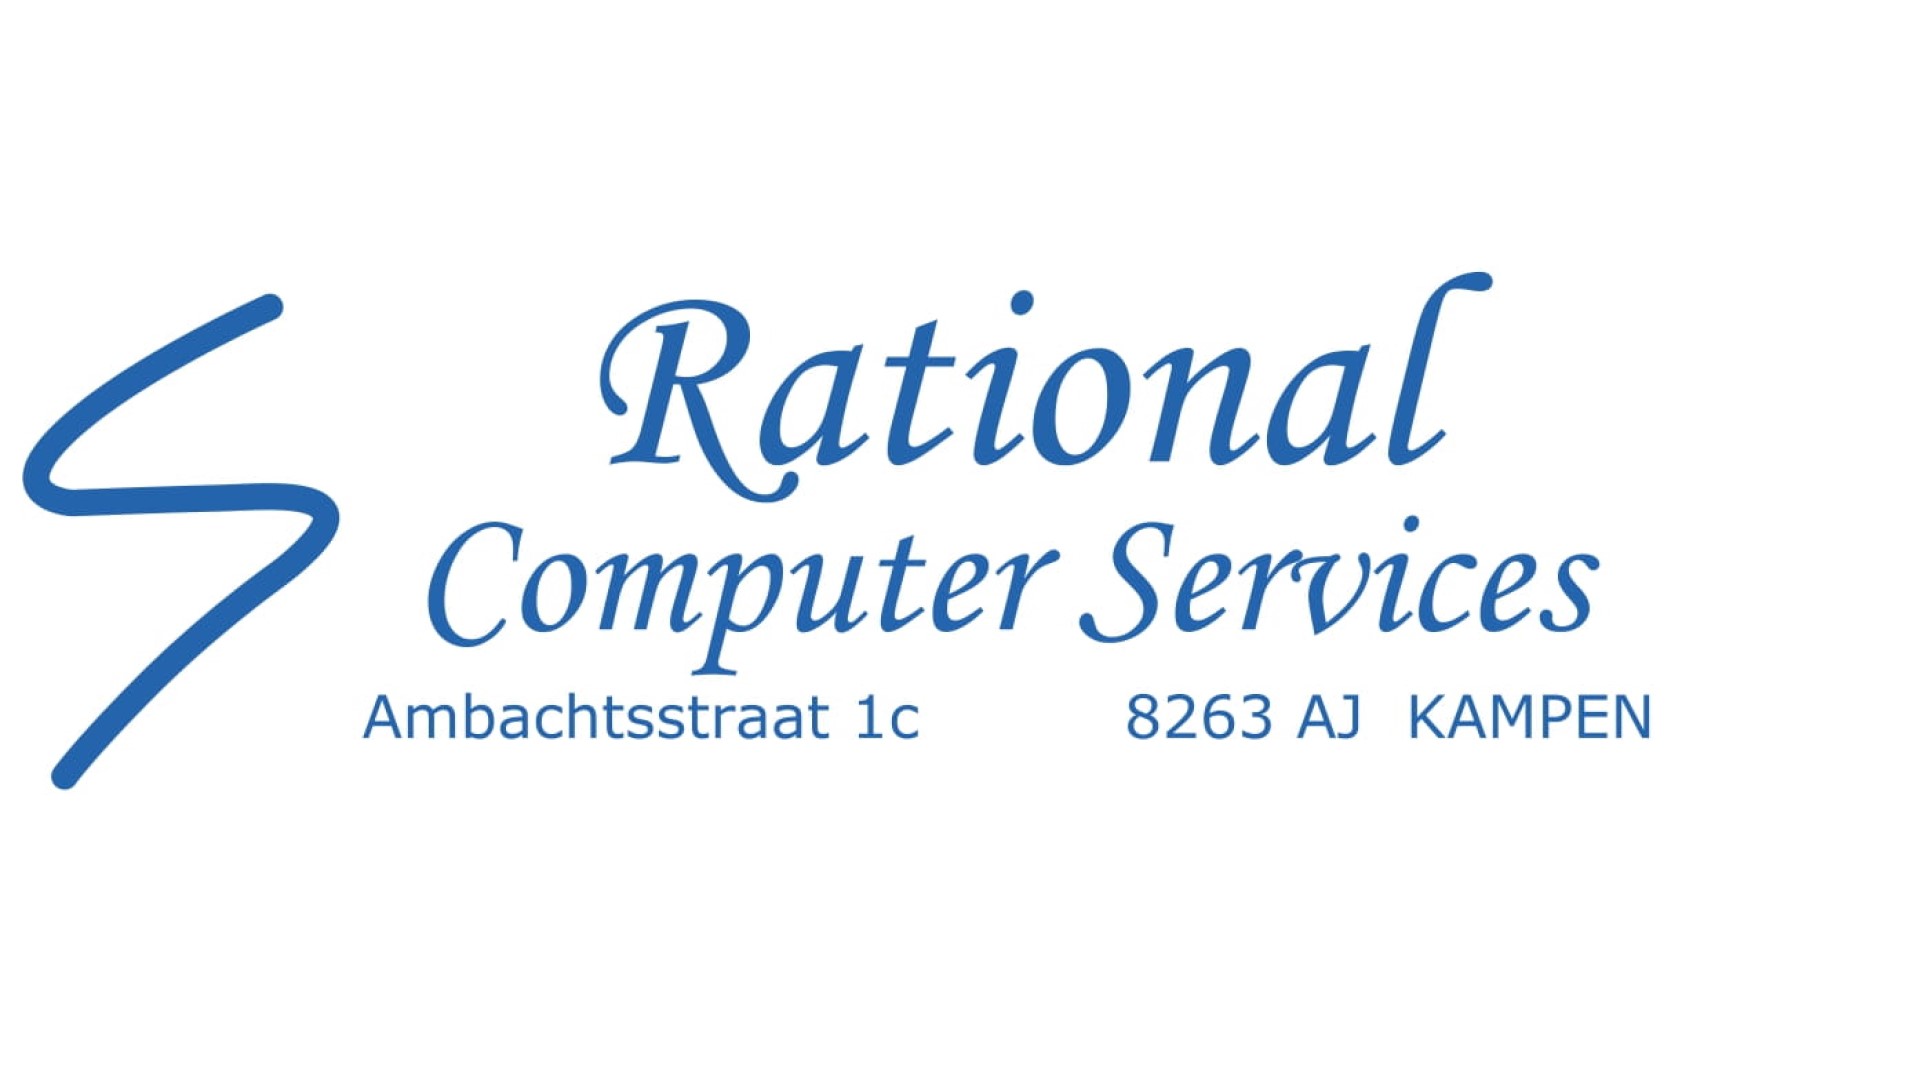 Rational Computer Services